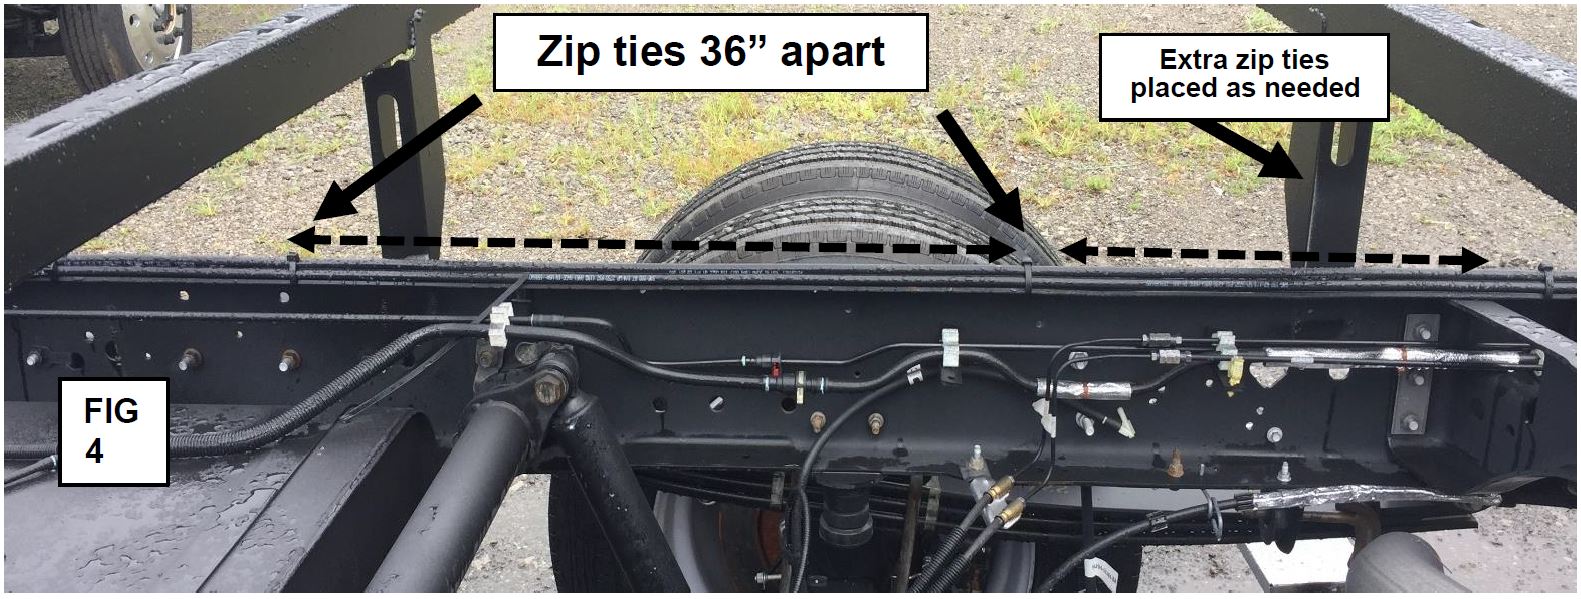 Extra zip ties placed as needed